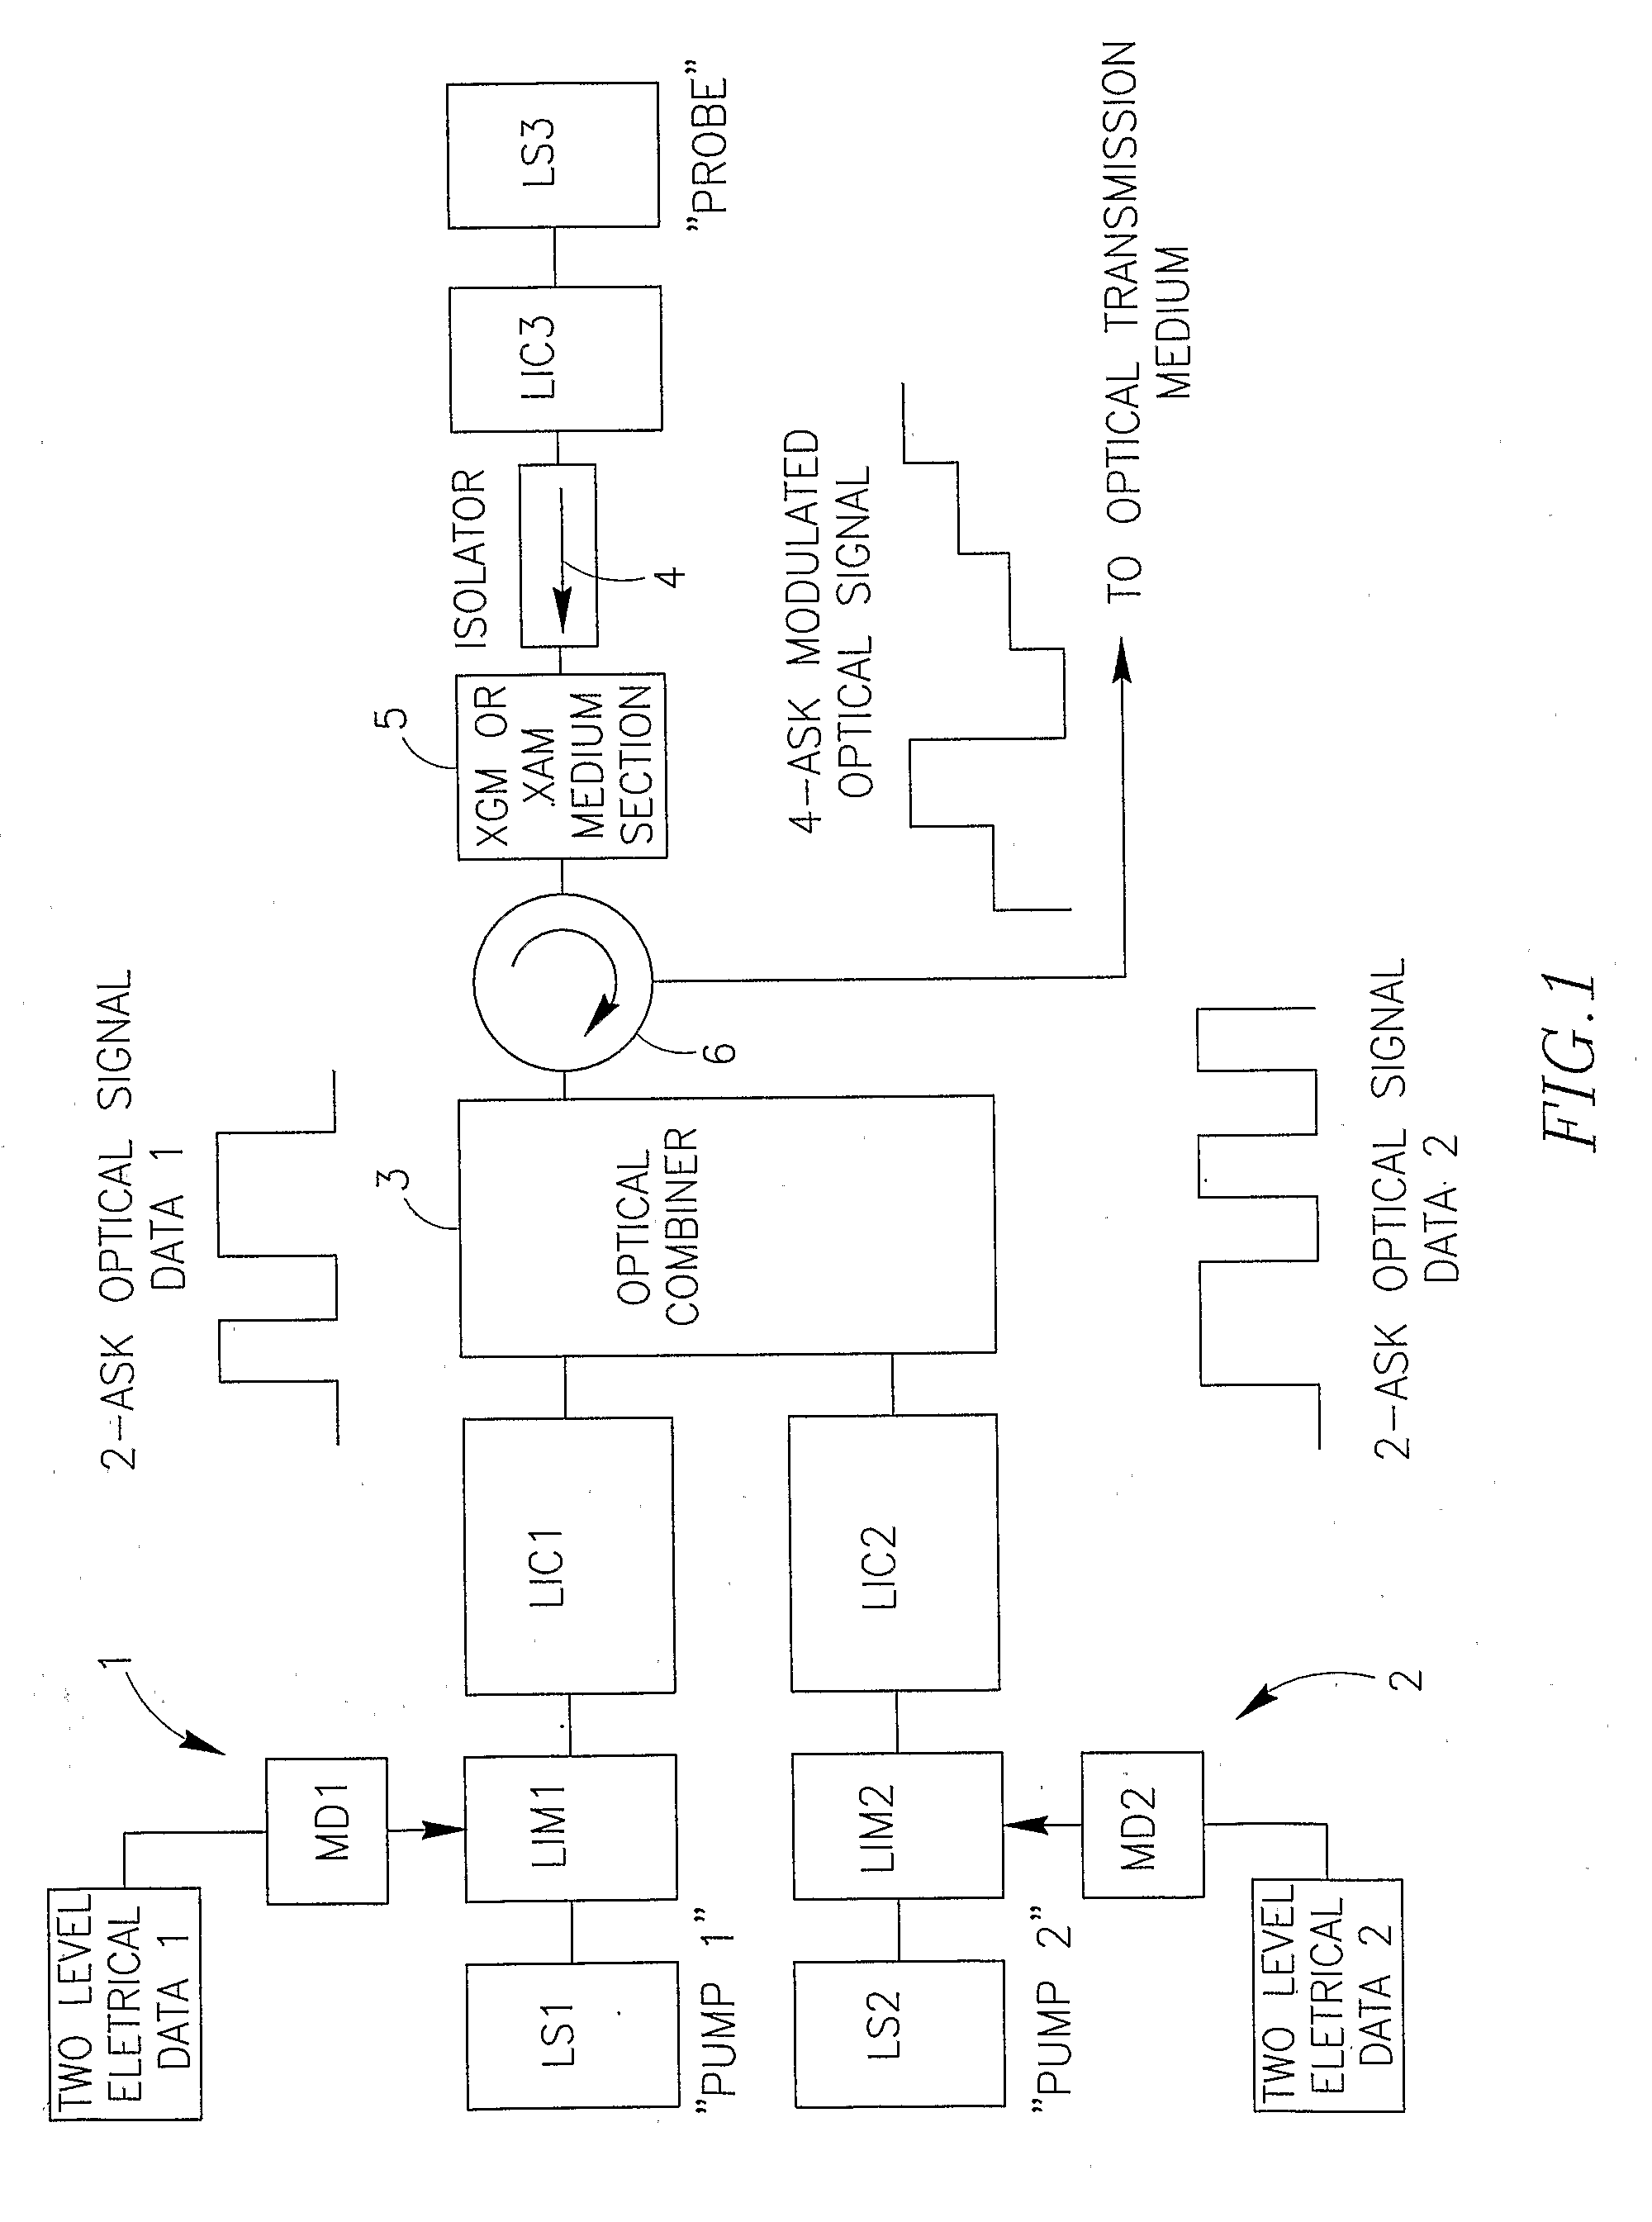 System and method for generating multilevel coded optical signals